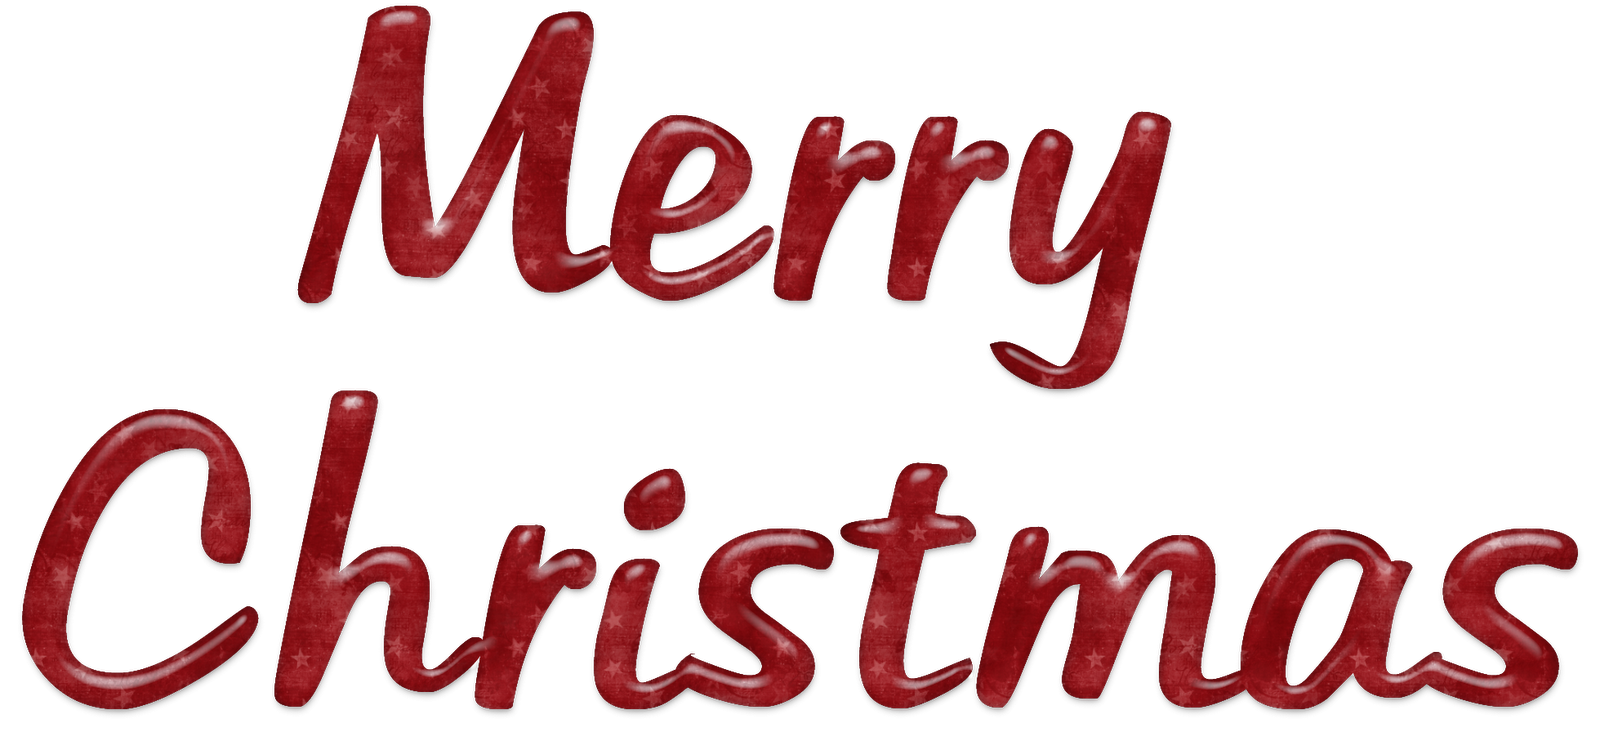 Download Merry Christmas Word Art | Free download best Merry ...